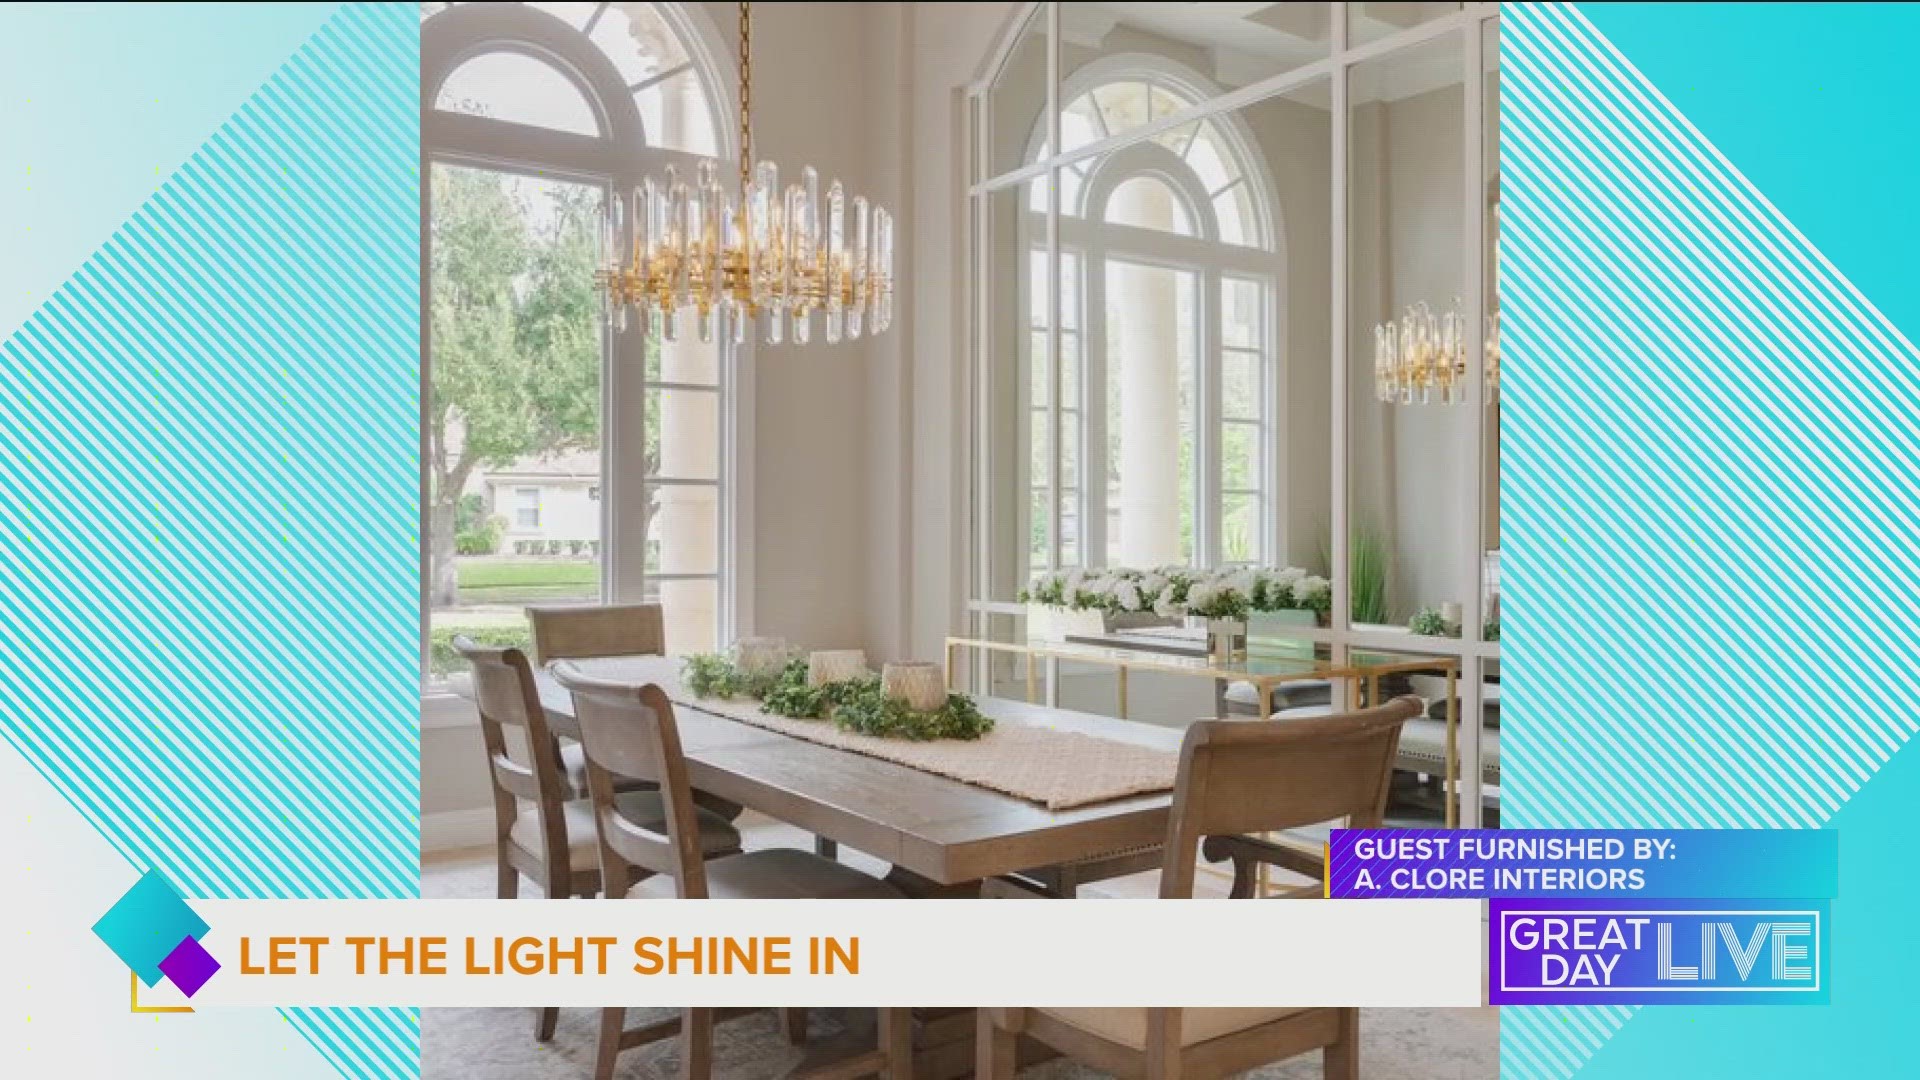 Interior designer Amber Clore Morales shows us how we can use natural light and other techniques to brighten up our home.